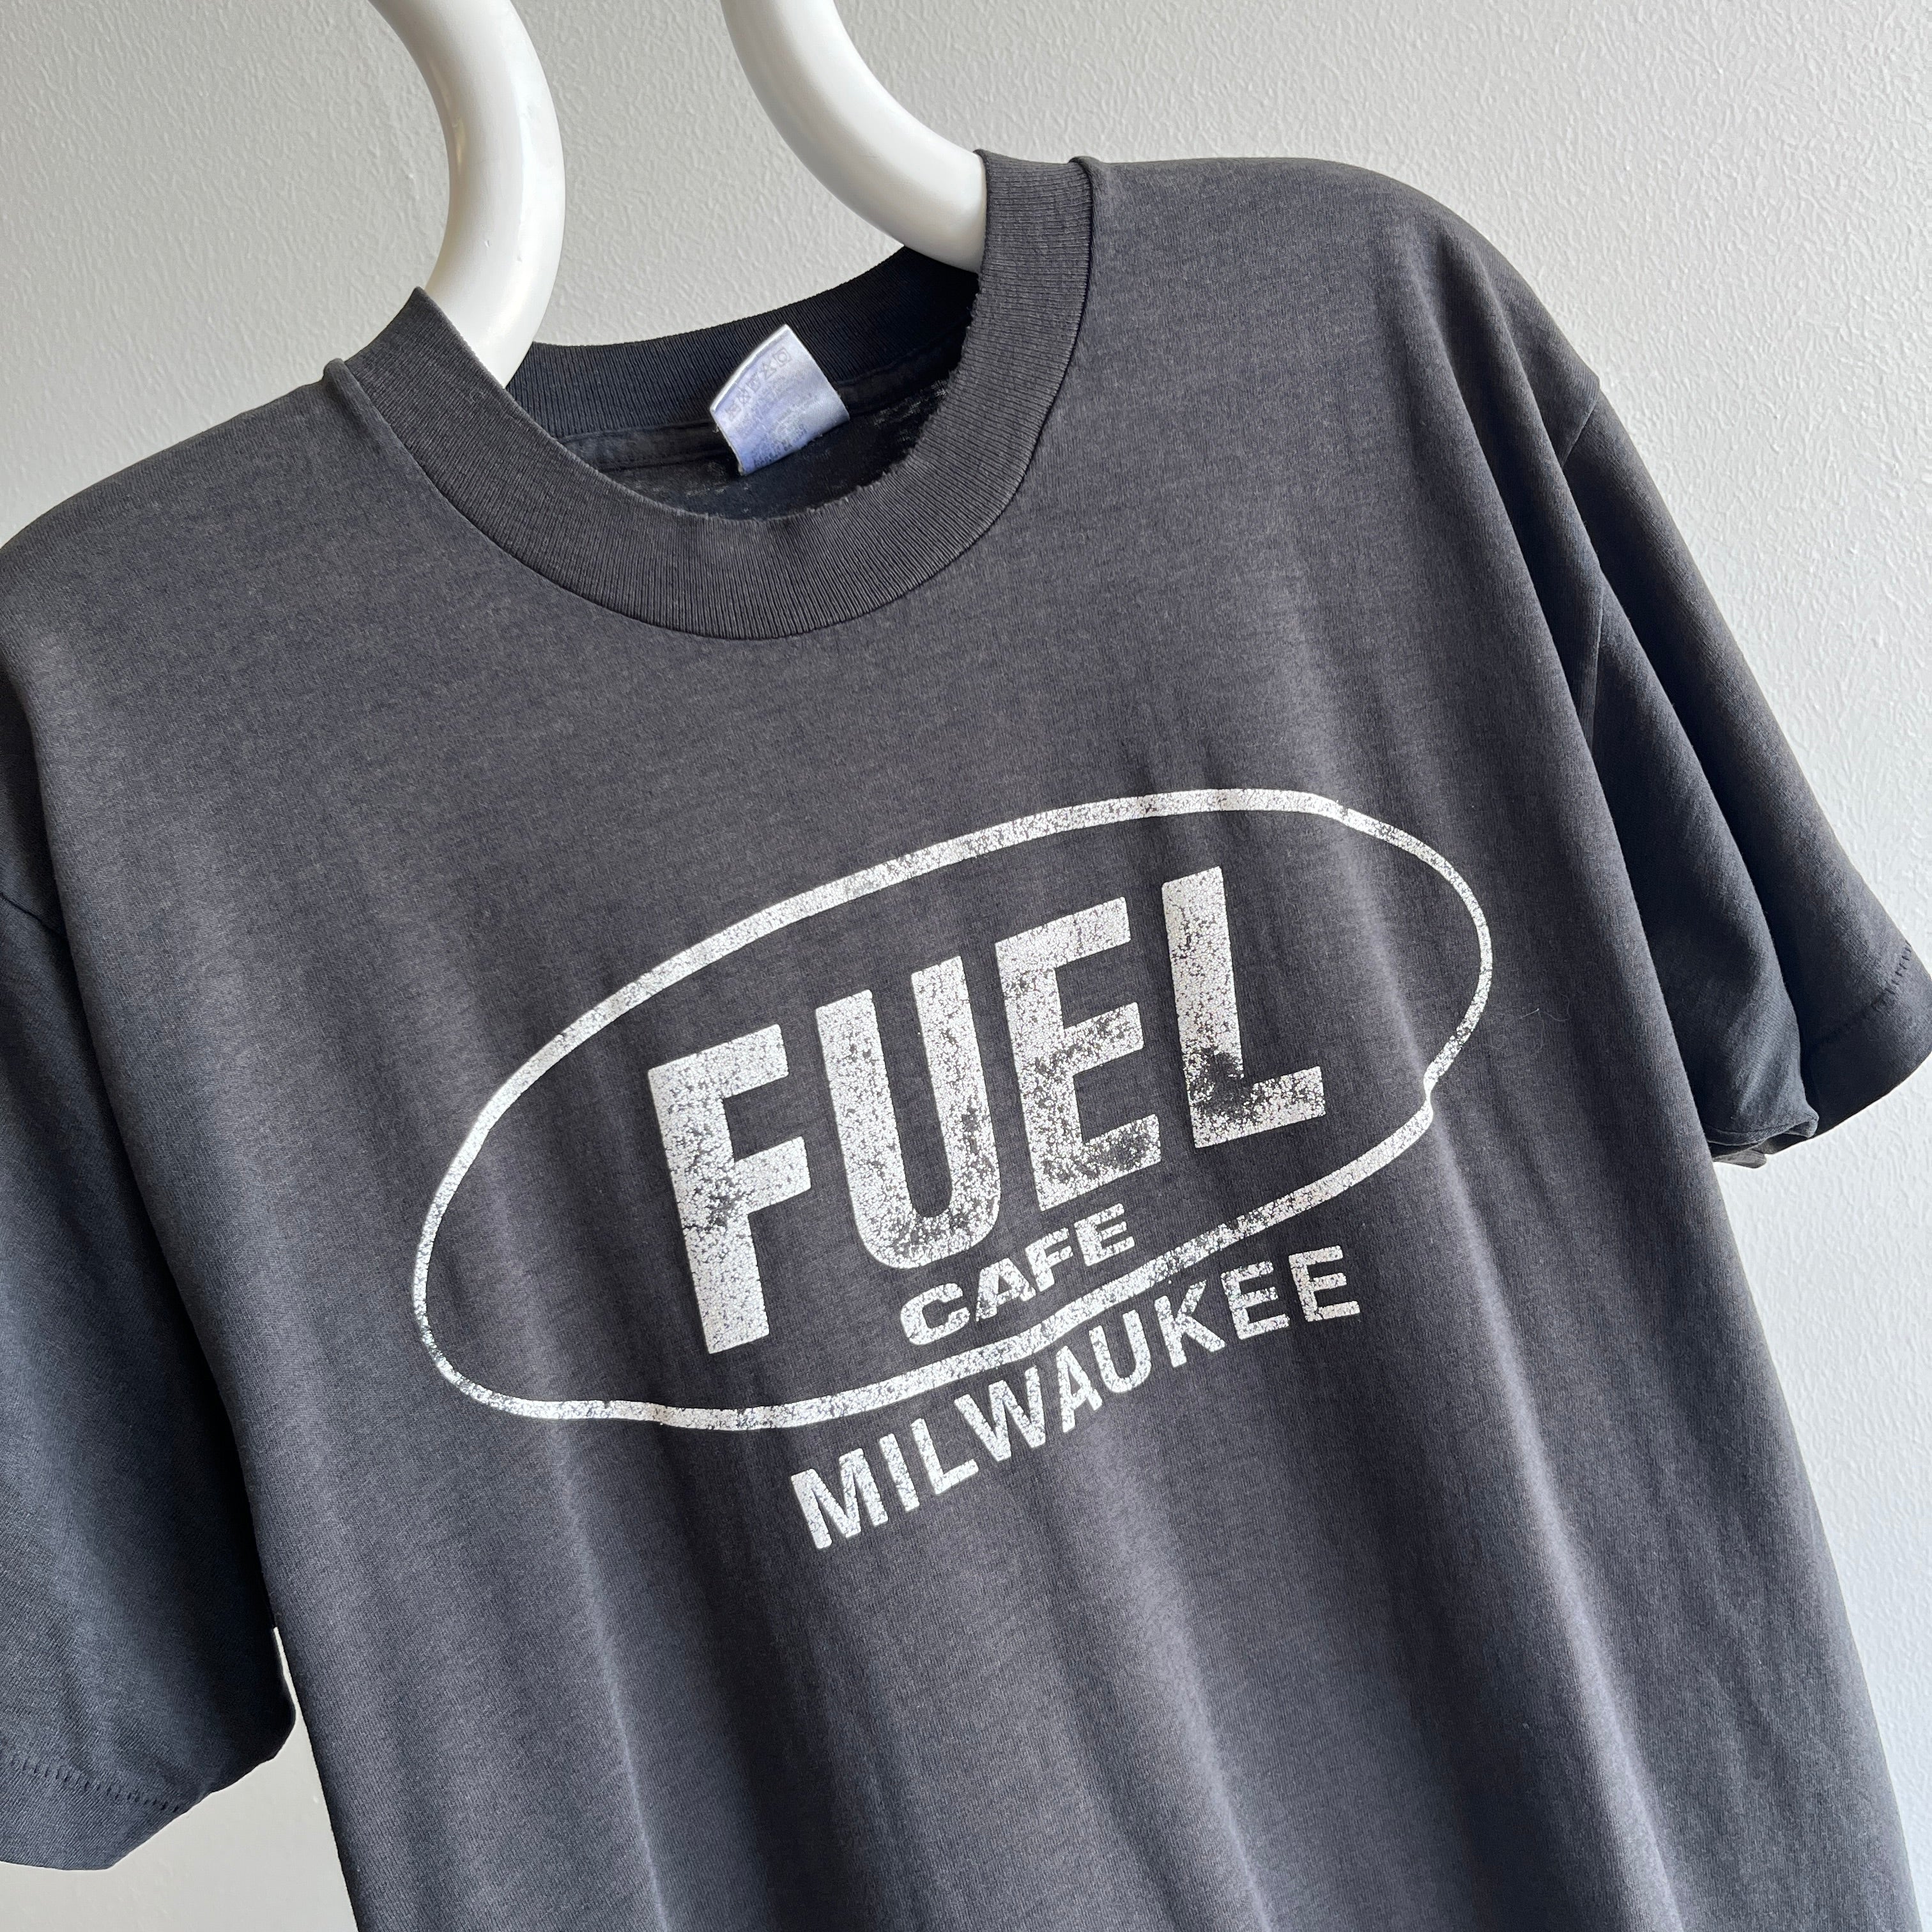 1980/90s Fuel Cafe Milwaukee T-Shirt with Complementary Crusty Arm Pits (There I said it)